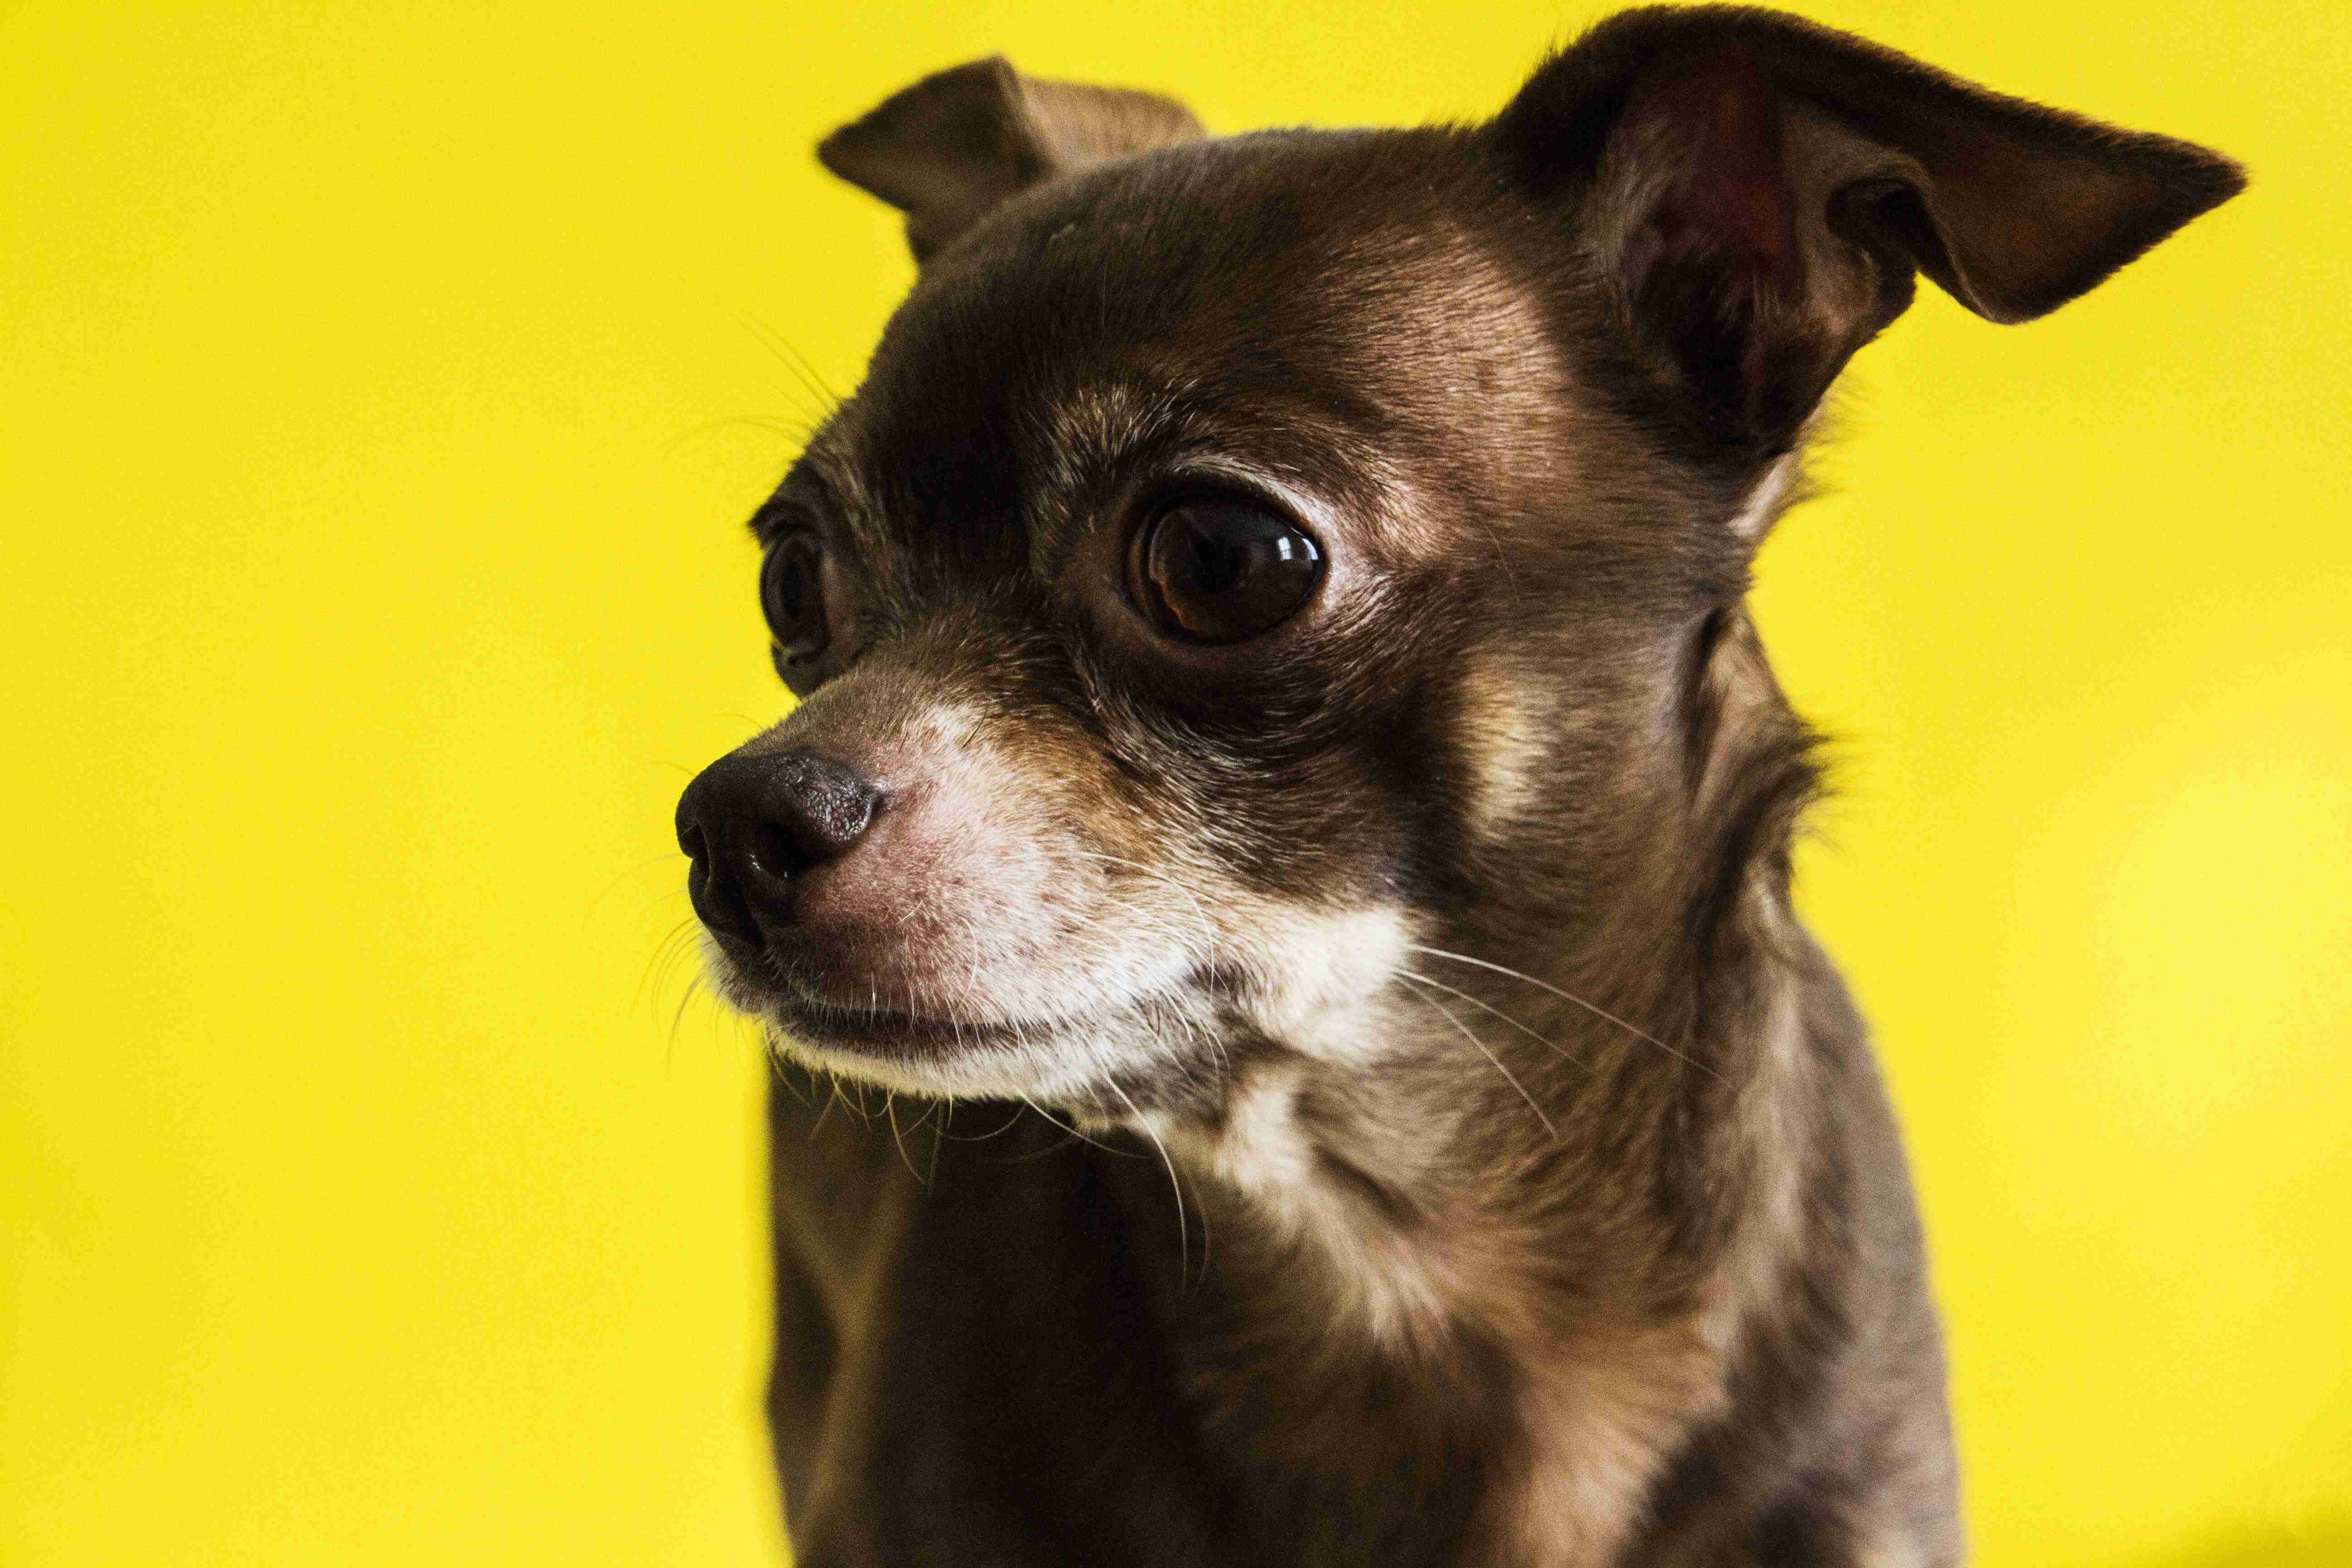 Are there any specific training tools or equipment that can be helpful for managing a Chihuahua's anger?